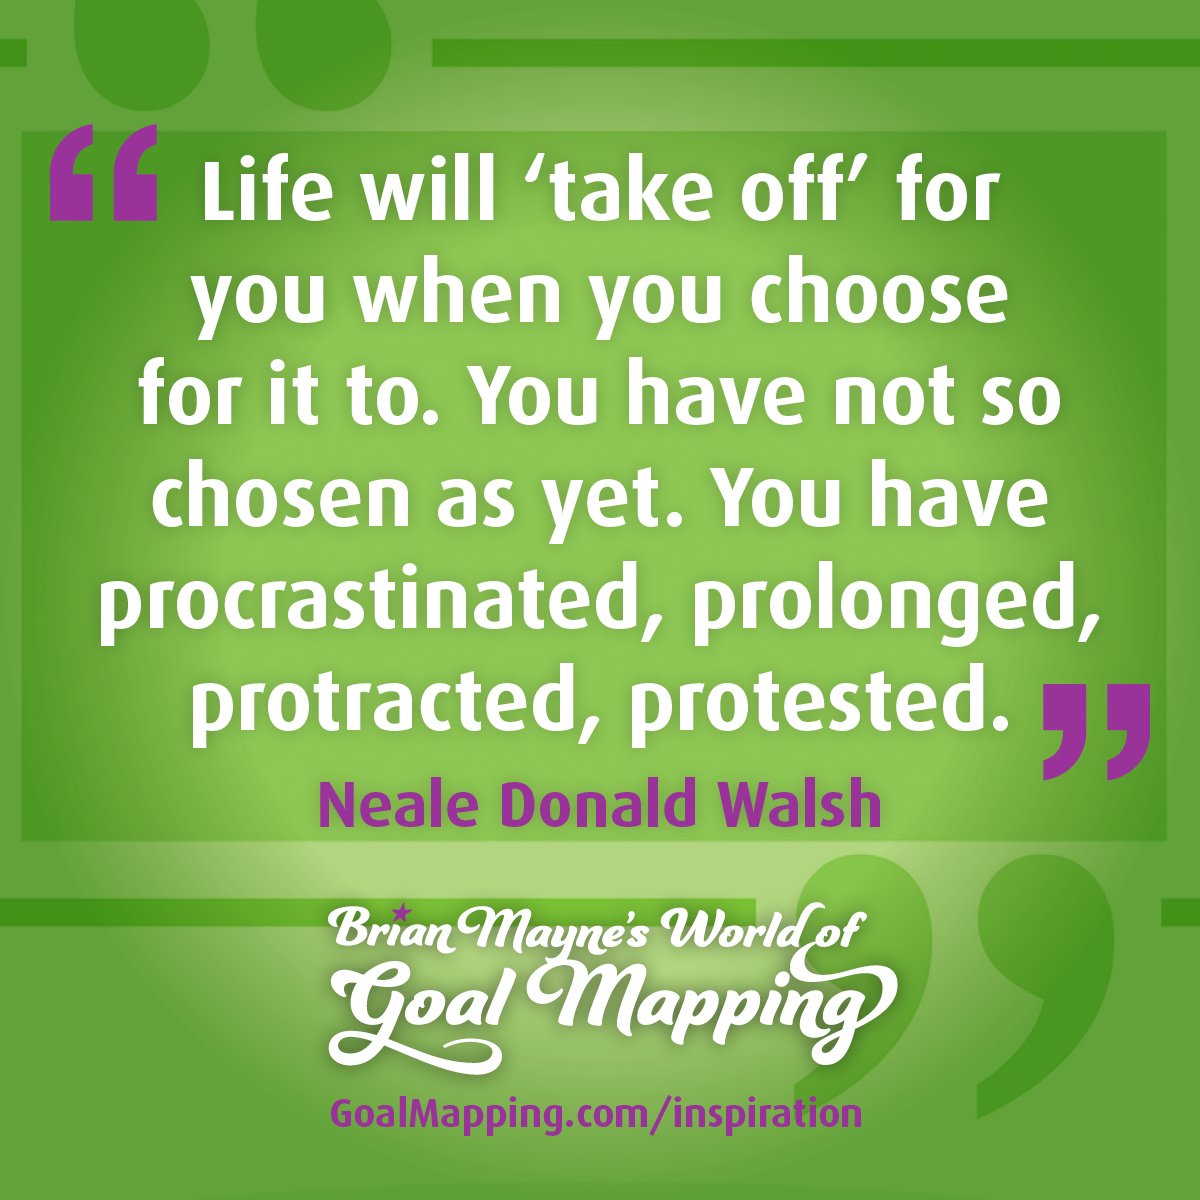 "Life will “take off” for you, then, when you choose for it to. You have not so chosen as yet. You have procrastinated, prolonged, protracted, protested." Neale Donald Walsh